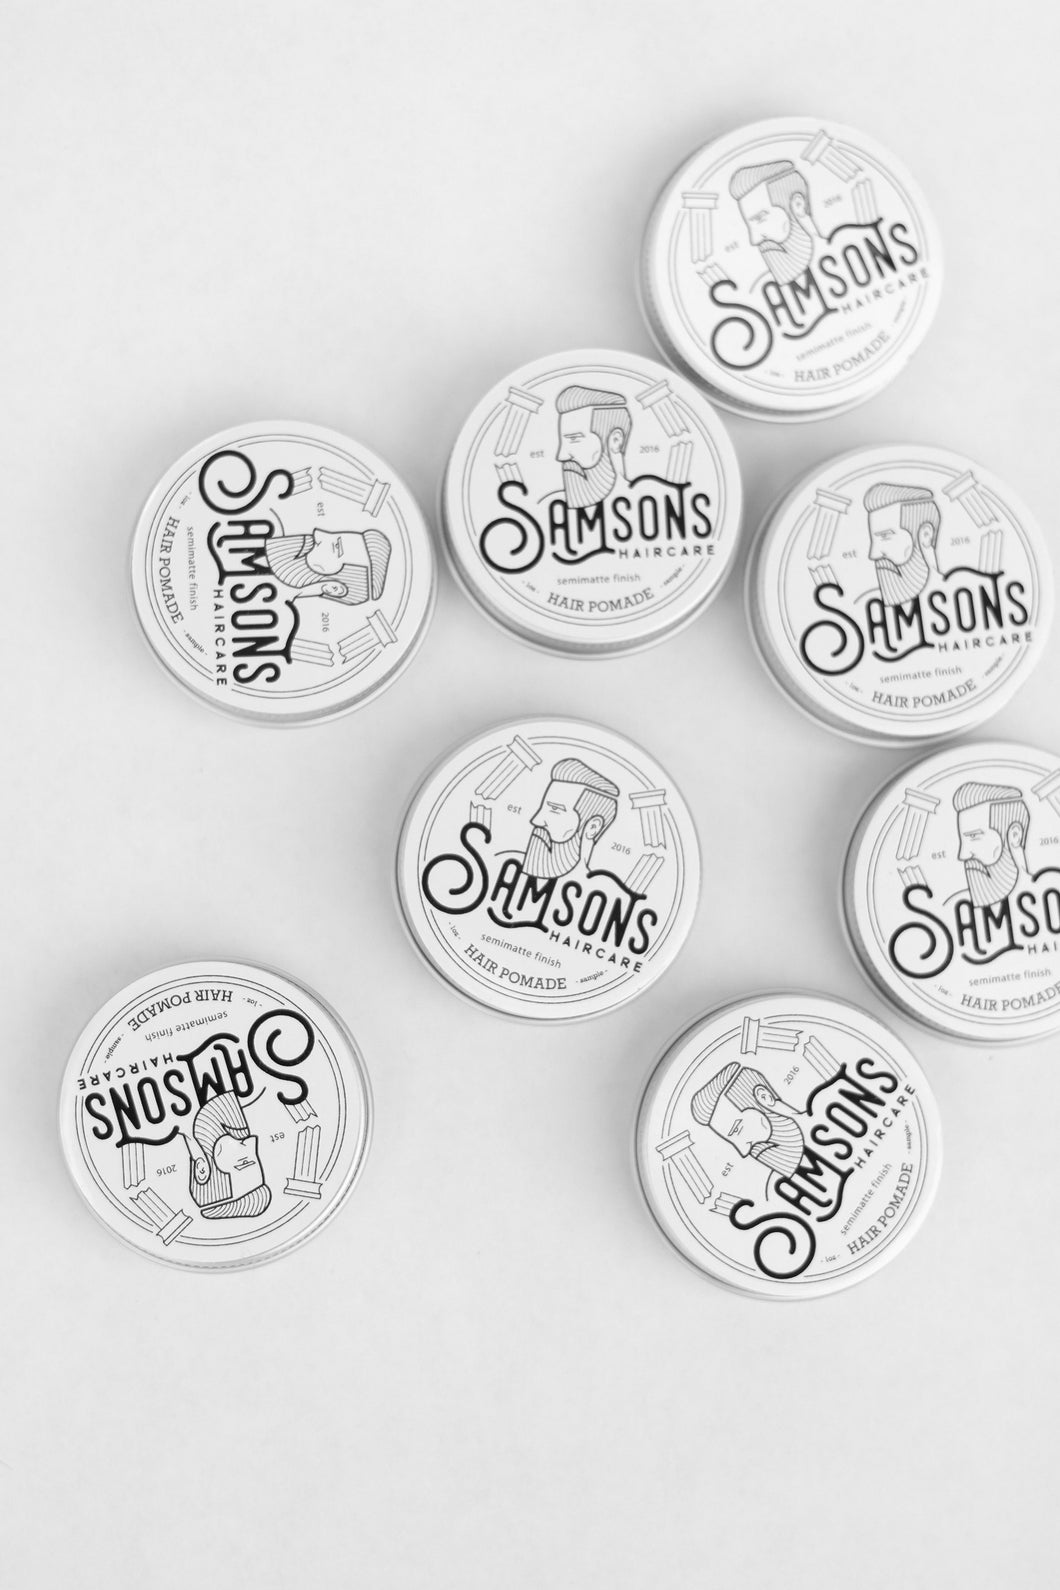 Overhead view of 1 oz hair pomades with the old logo spread out on white surface.